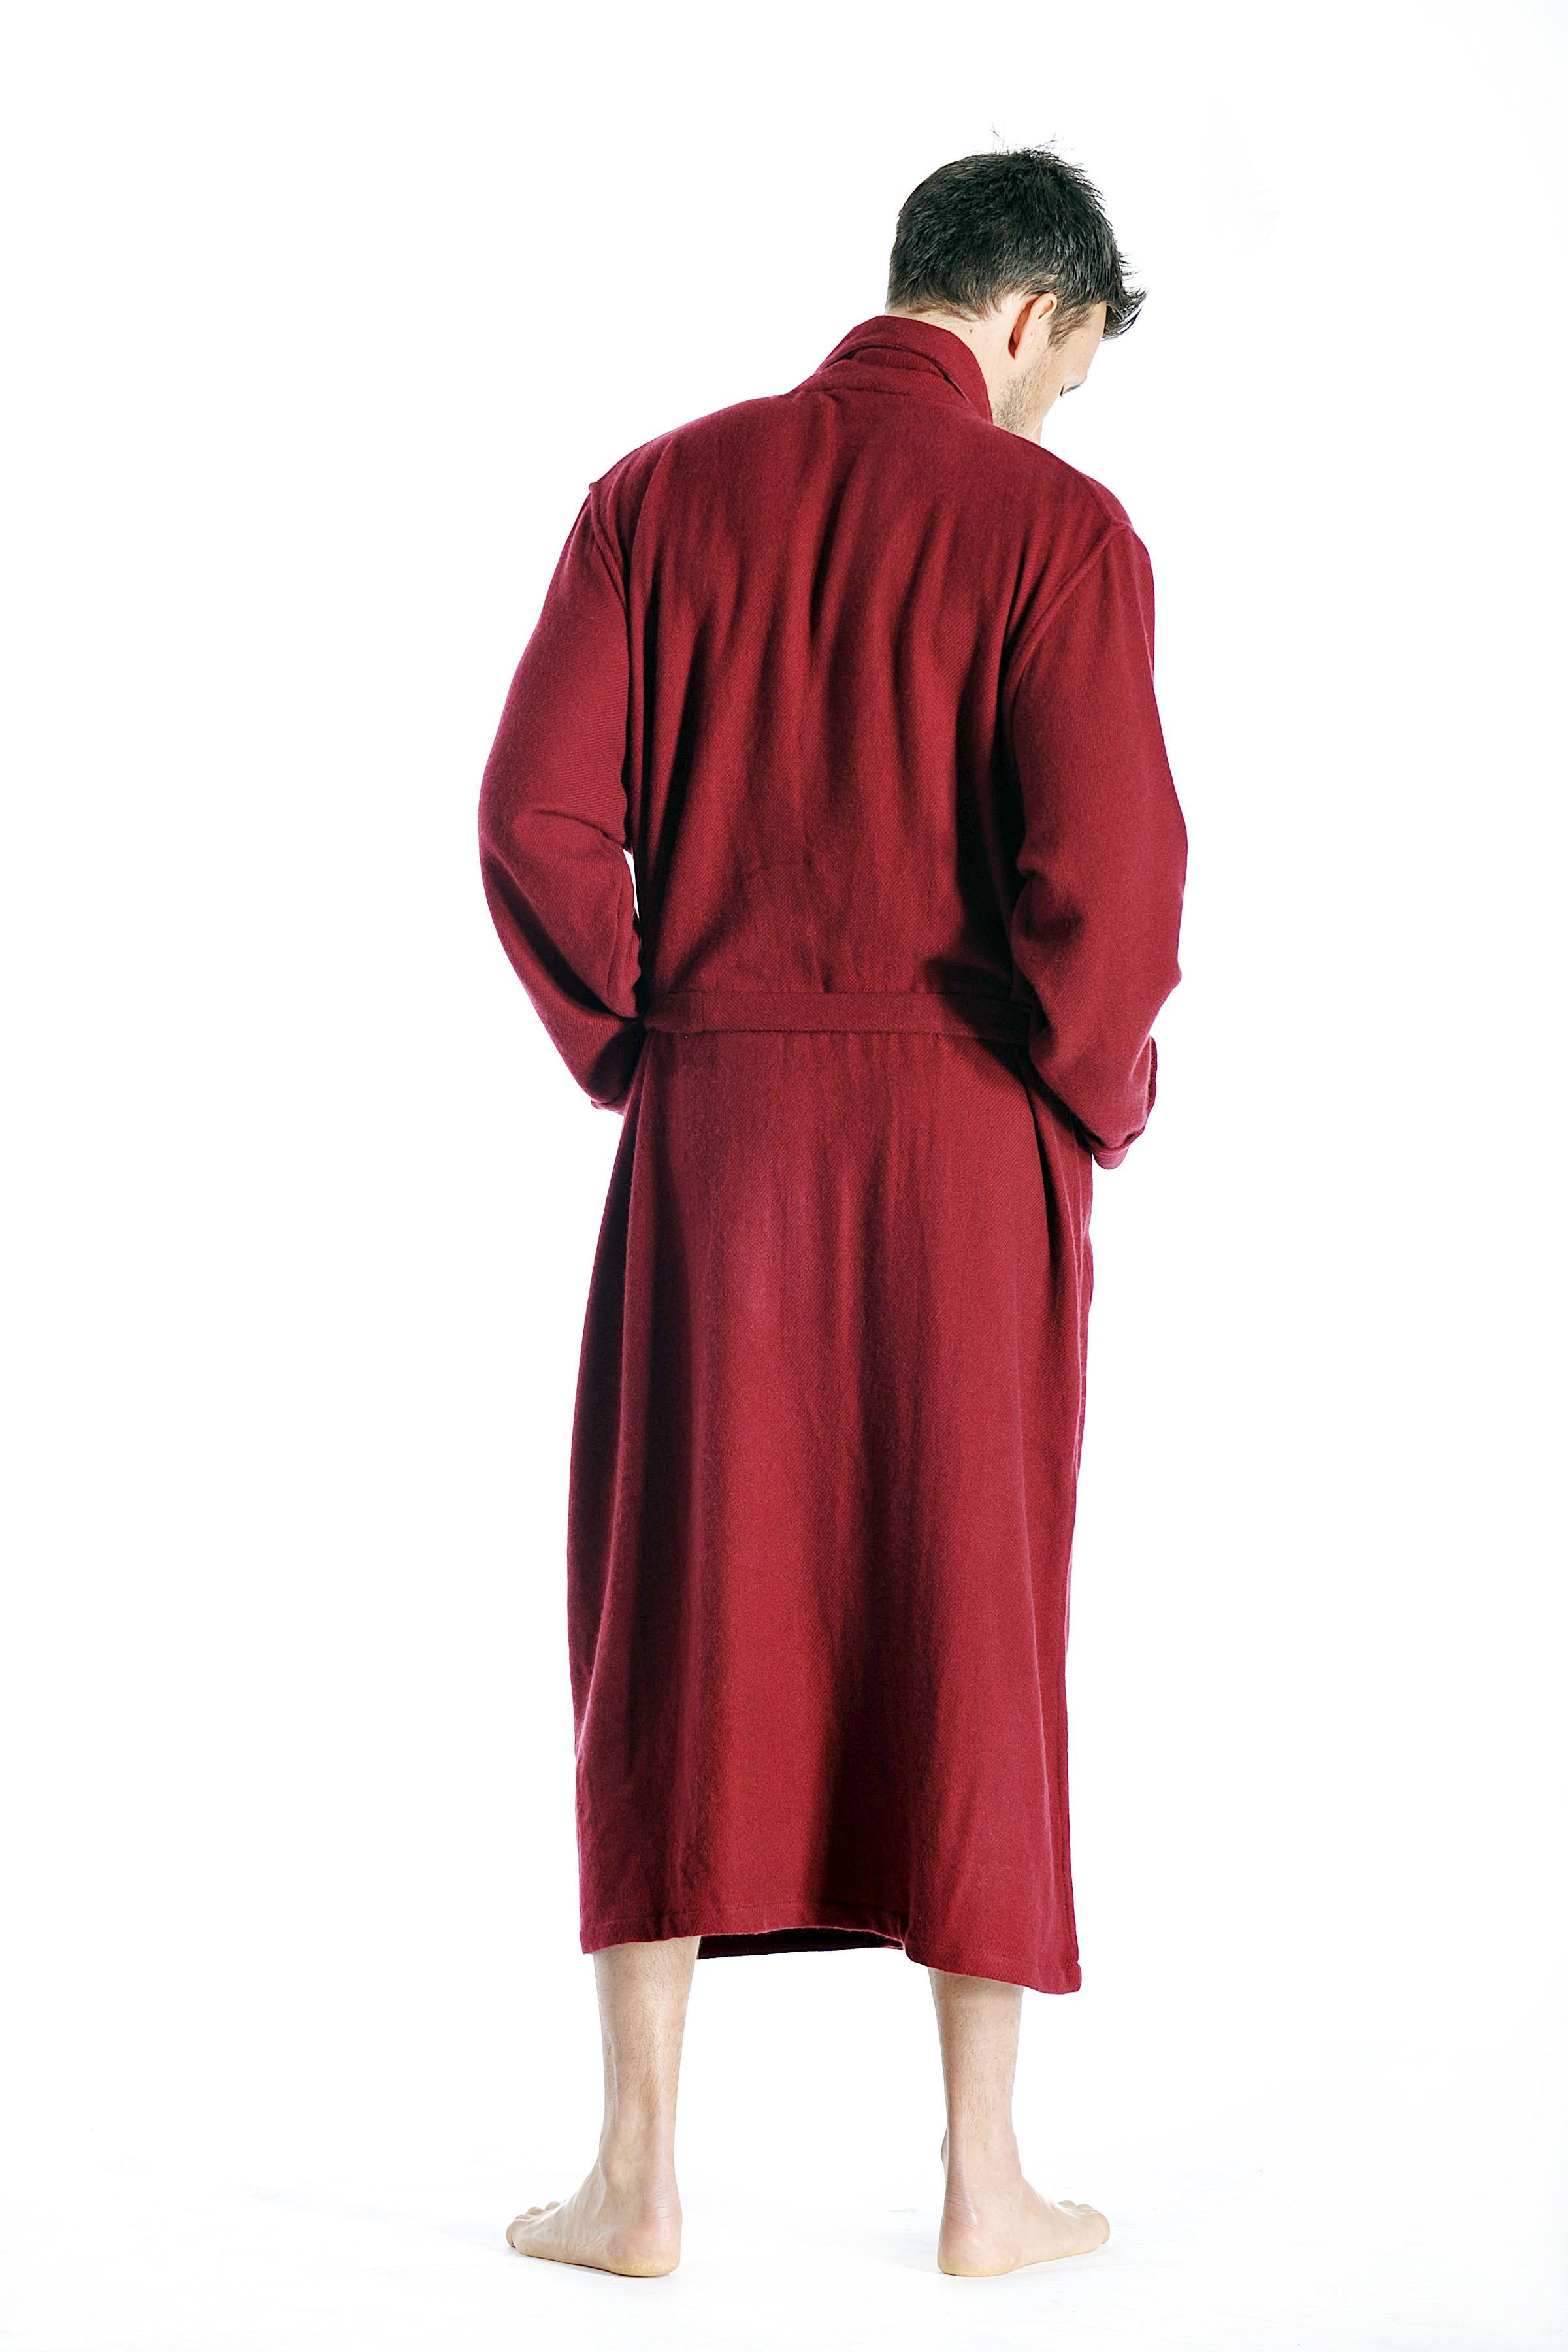 Pure Cashmere Full Length Robe for Men (Faded Pewter, Large/Extra Large)